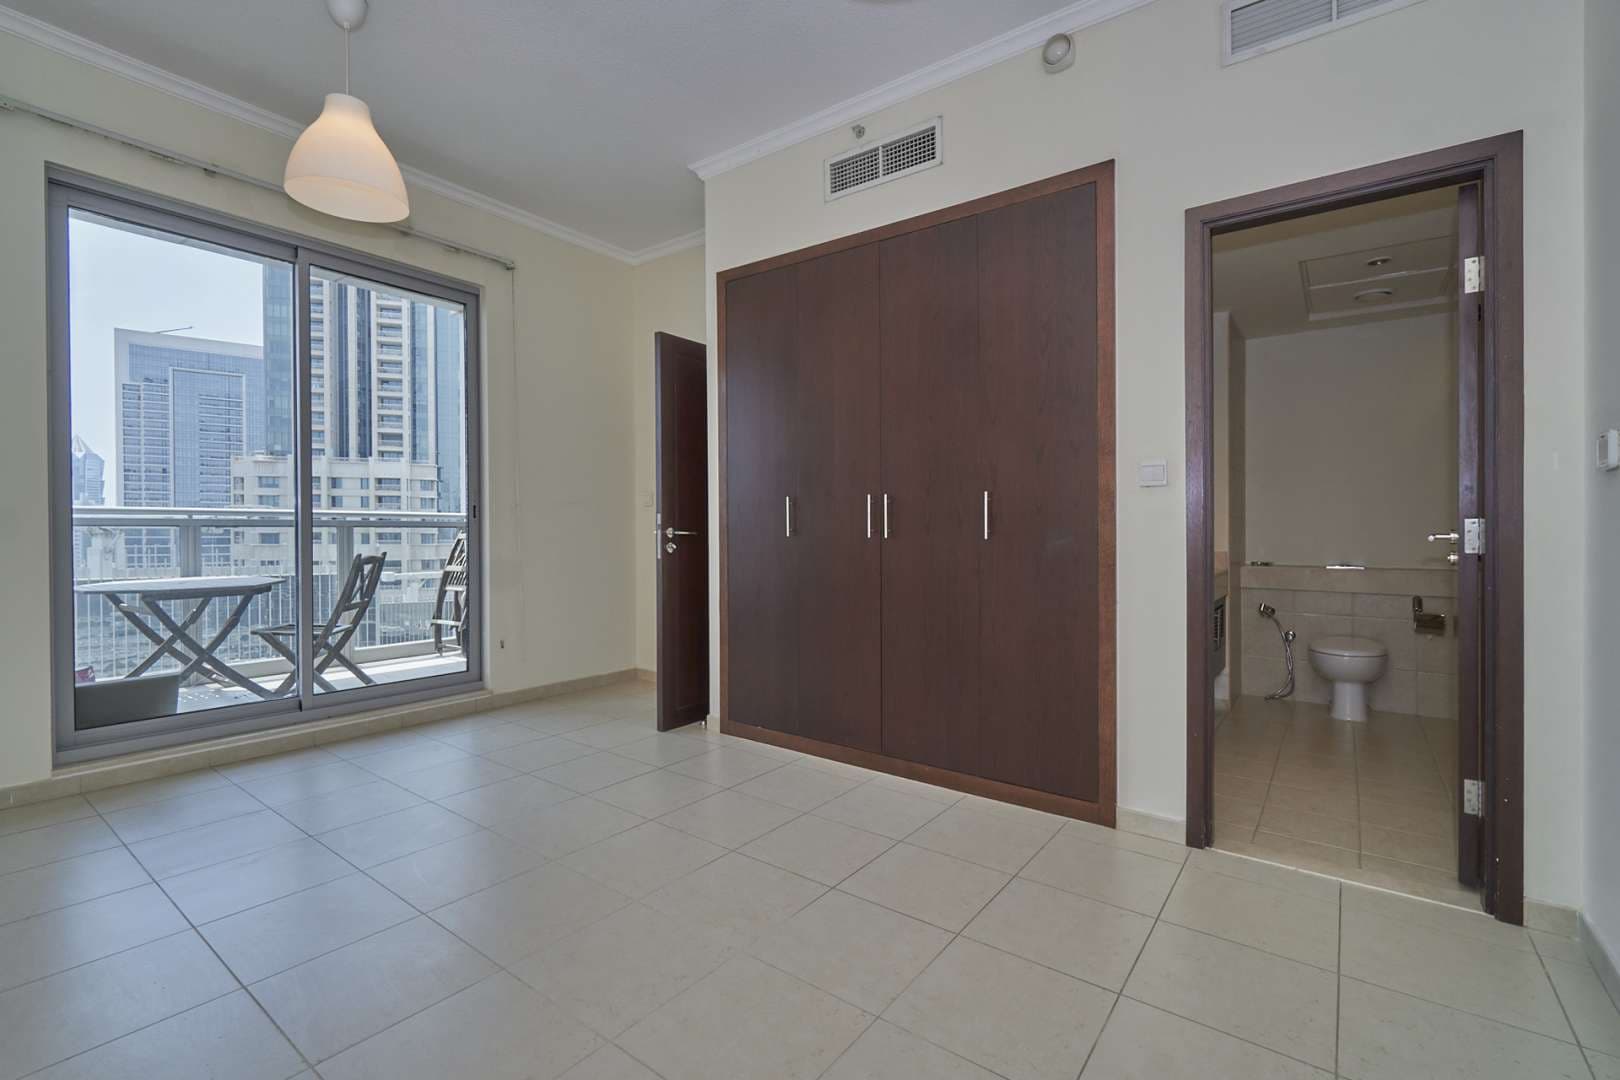 1 Bedroom Apartment For Rent The Residences Lp11596 2c44313acc81d200.jpg